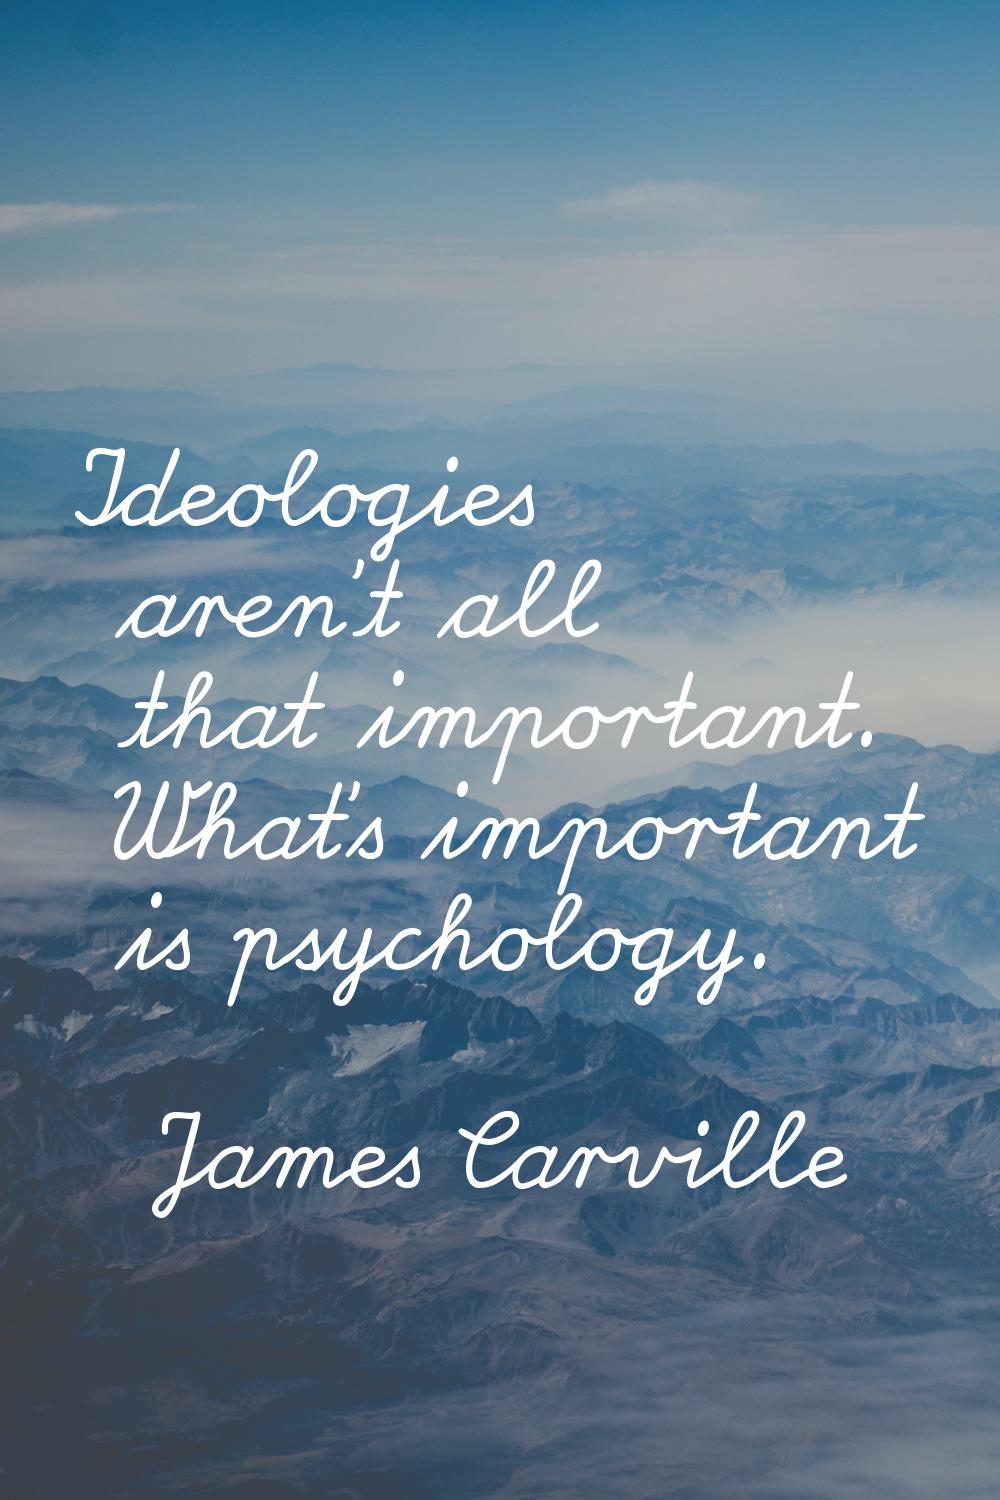 Ideologies aren't all that important. What's important is psychology.